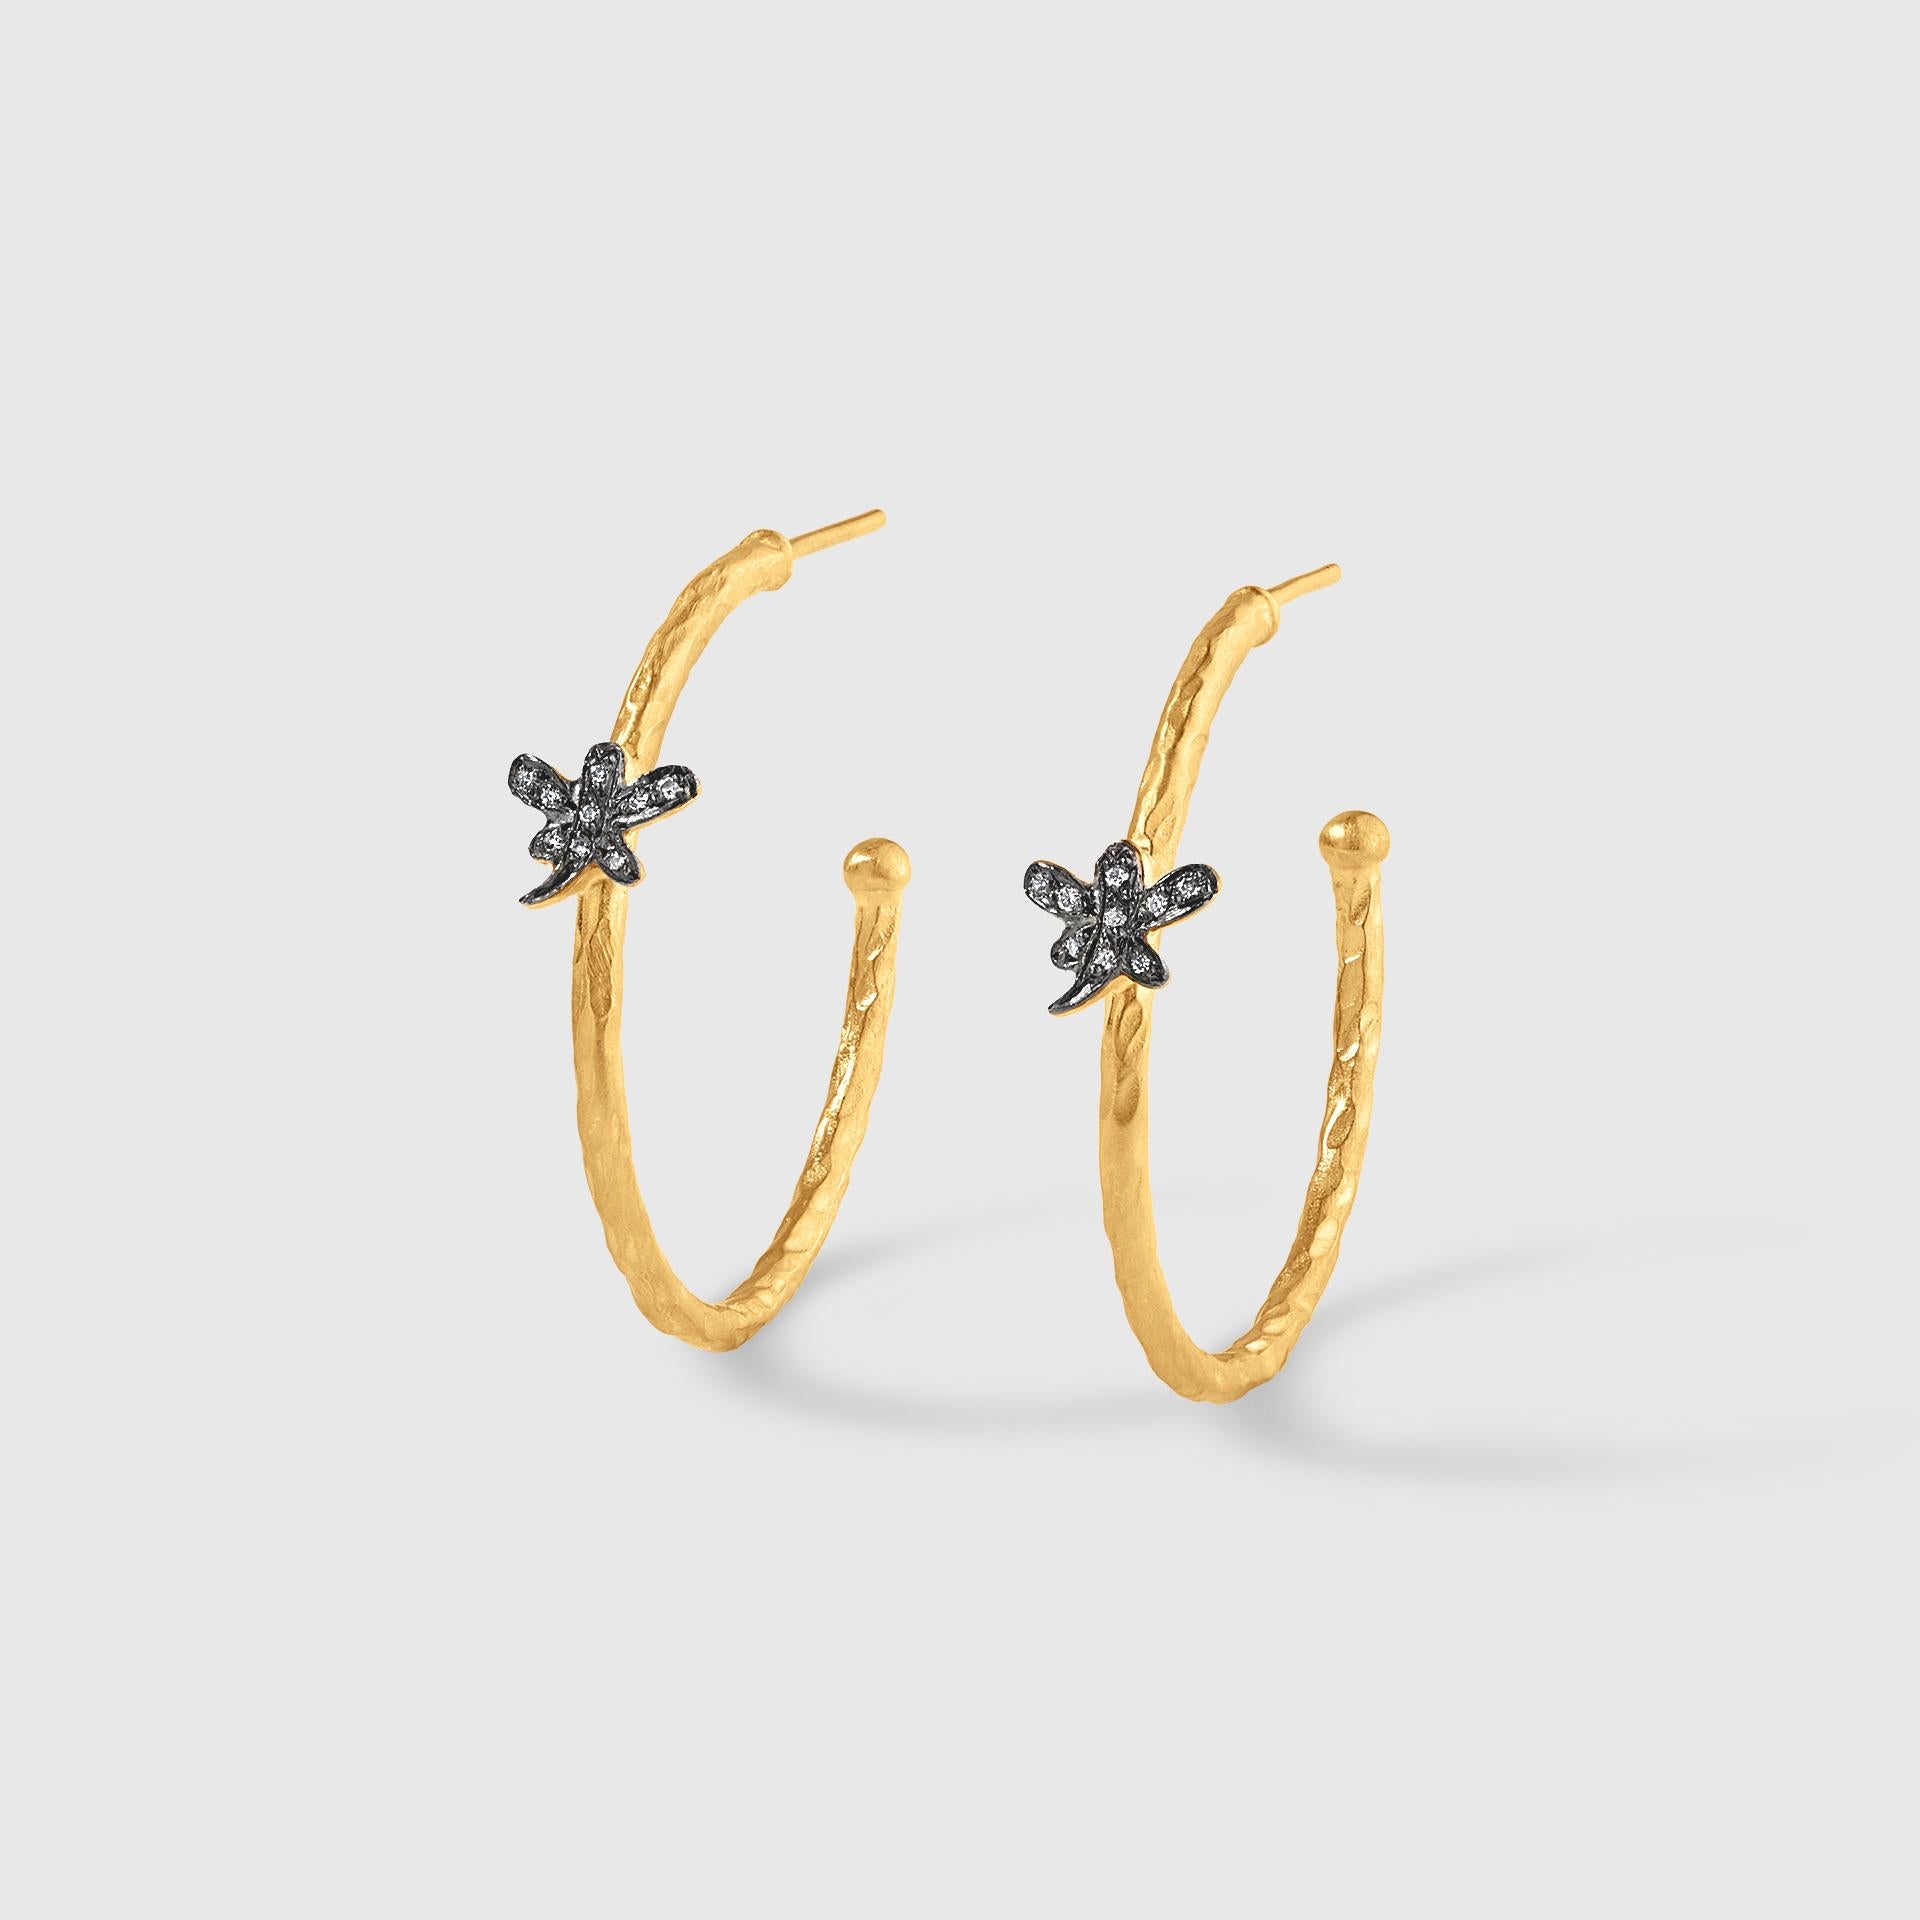 Dragon Fly Hoop Earrings with Diamonds, 24kt Yellow Gold and Silver, Size Large, Length: 1